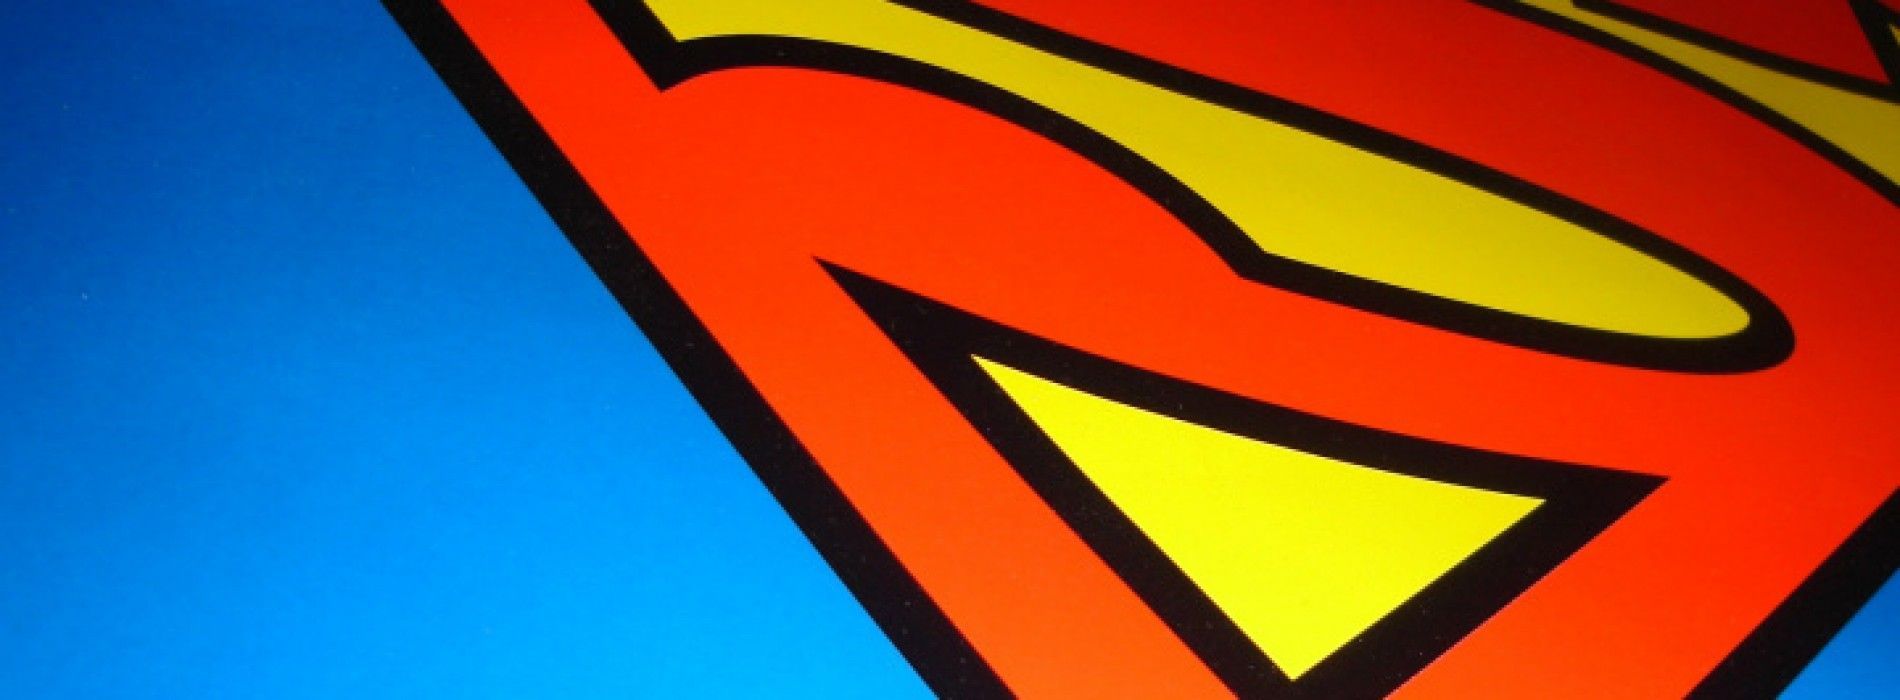 Superman Wallpapers Android